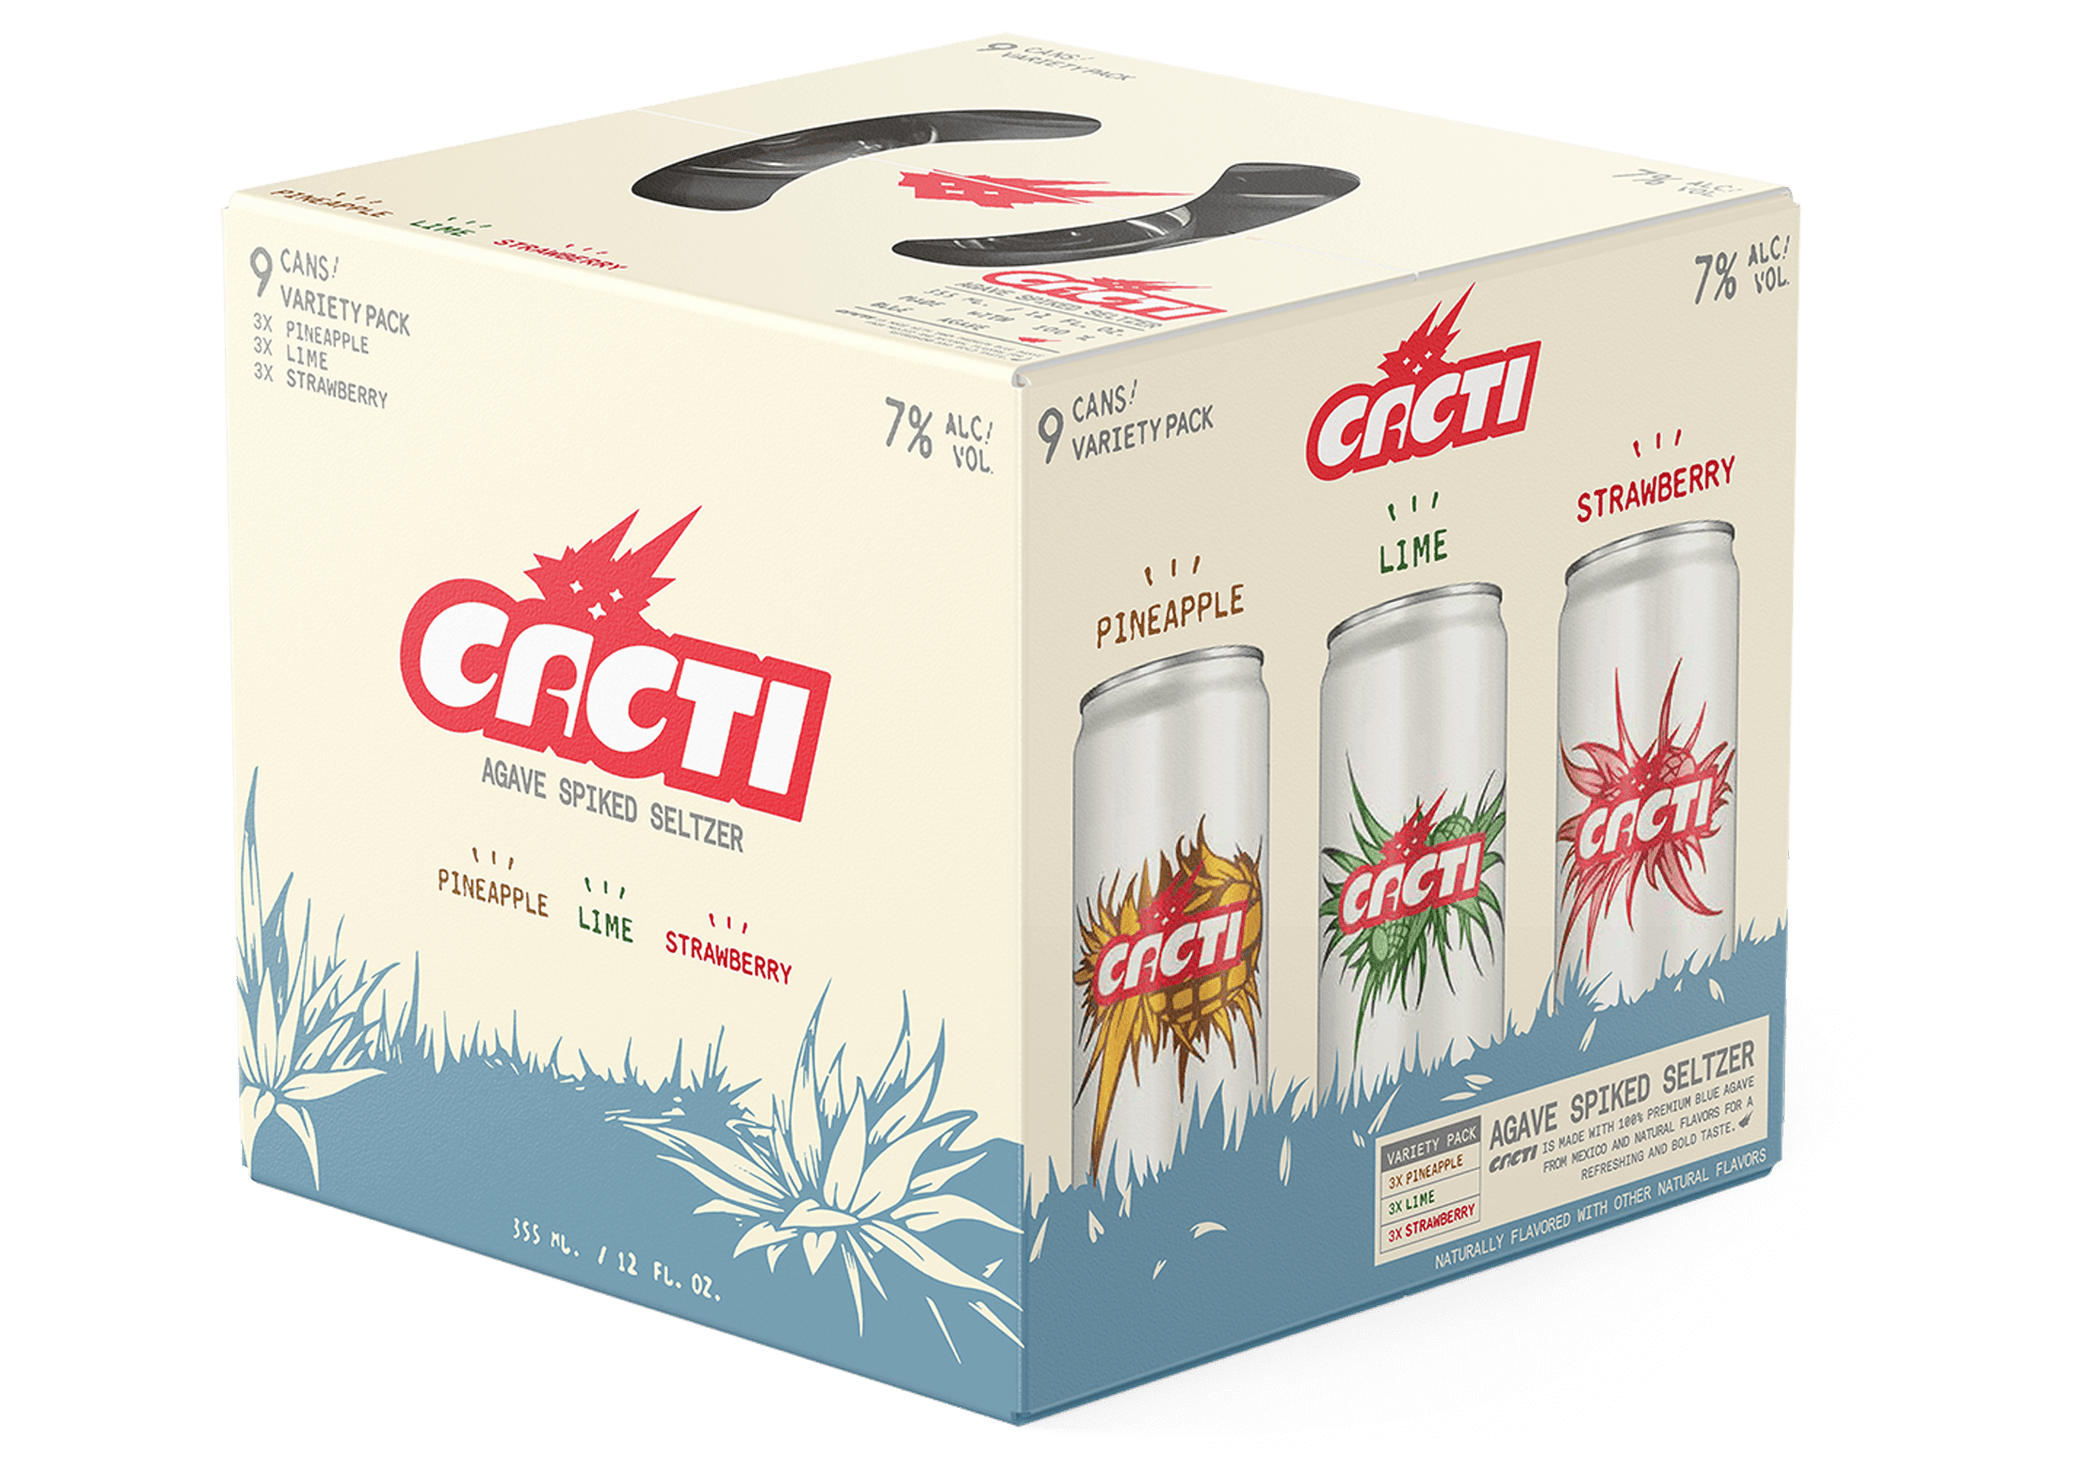 [BUY] Travis Scott | Cacti Variety Pack - Agave Spiked Seltzer at